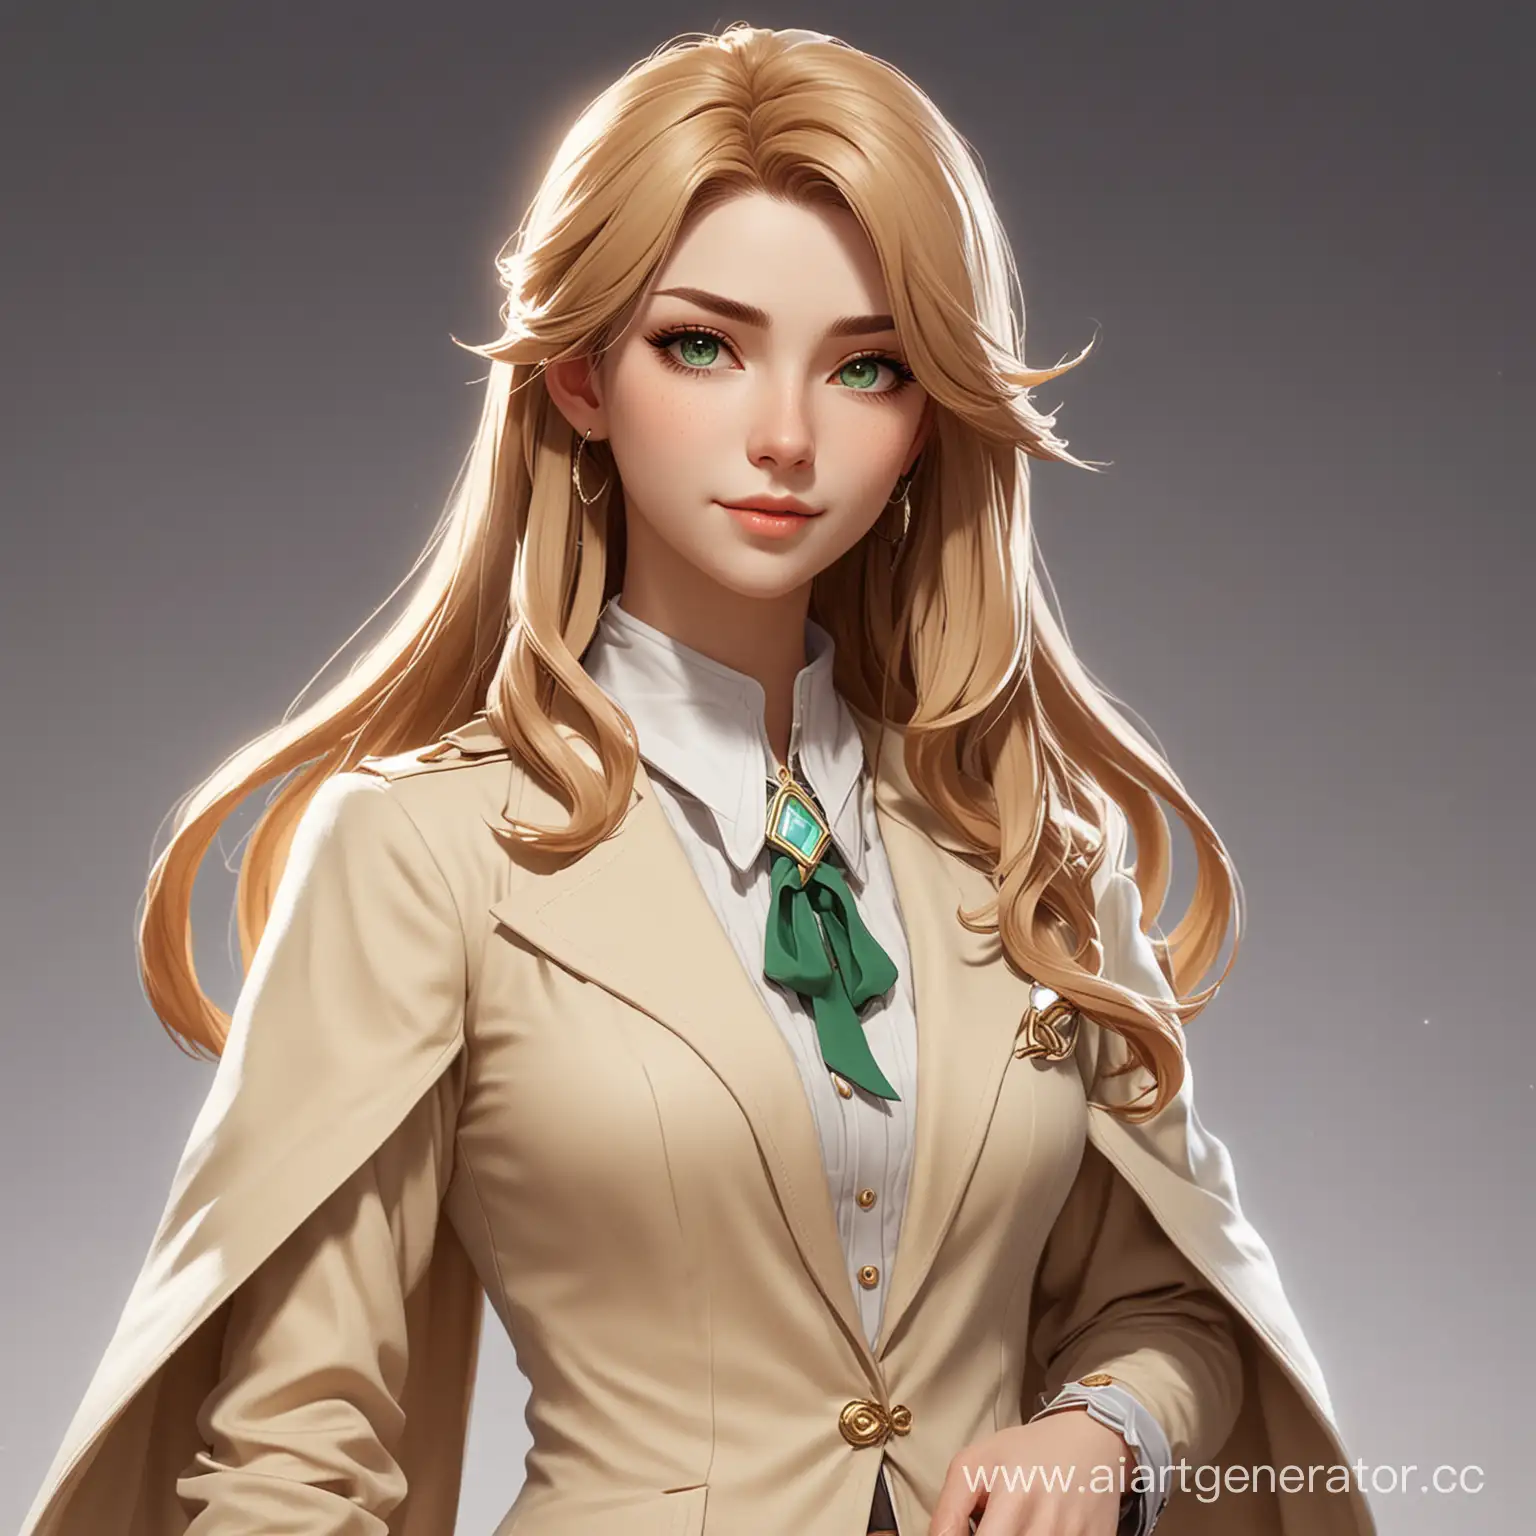 create a character in genshin impact style. A tall young woman, a magician who owns dendro power. She is a psychologist, wears a beige suit, she has a long light-brown hair and green eyes
